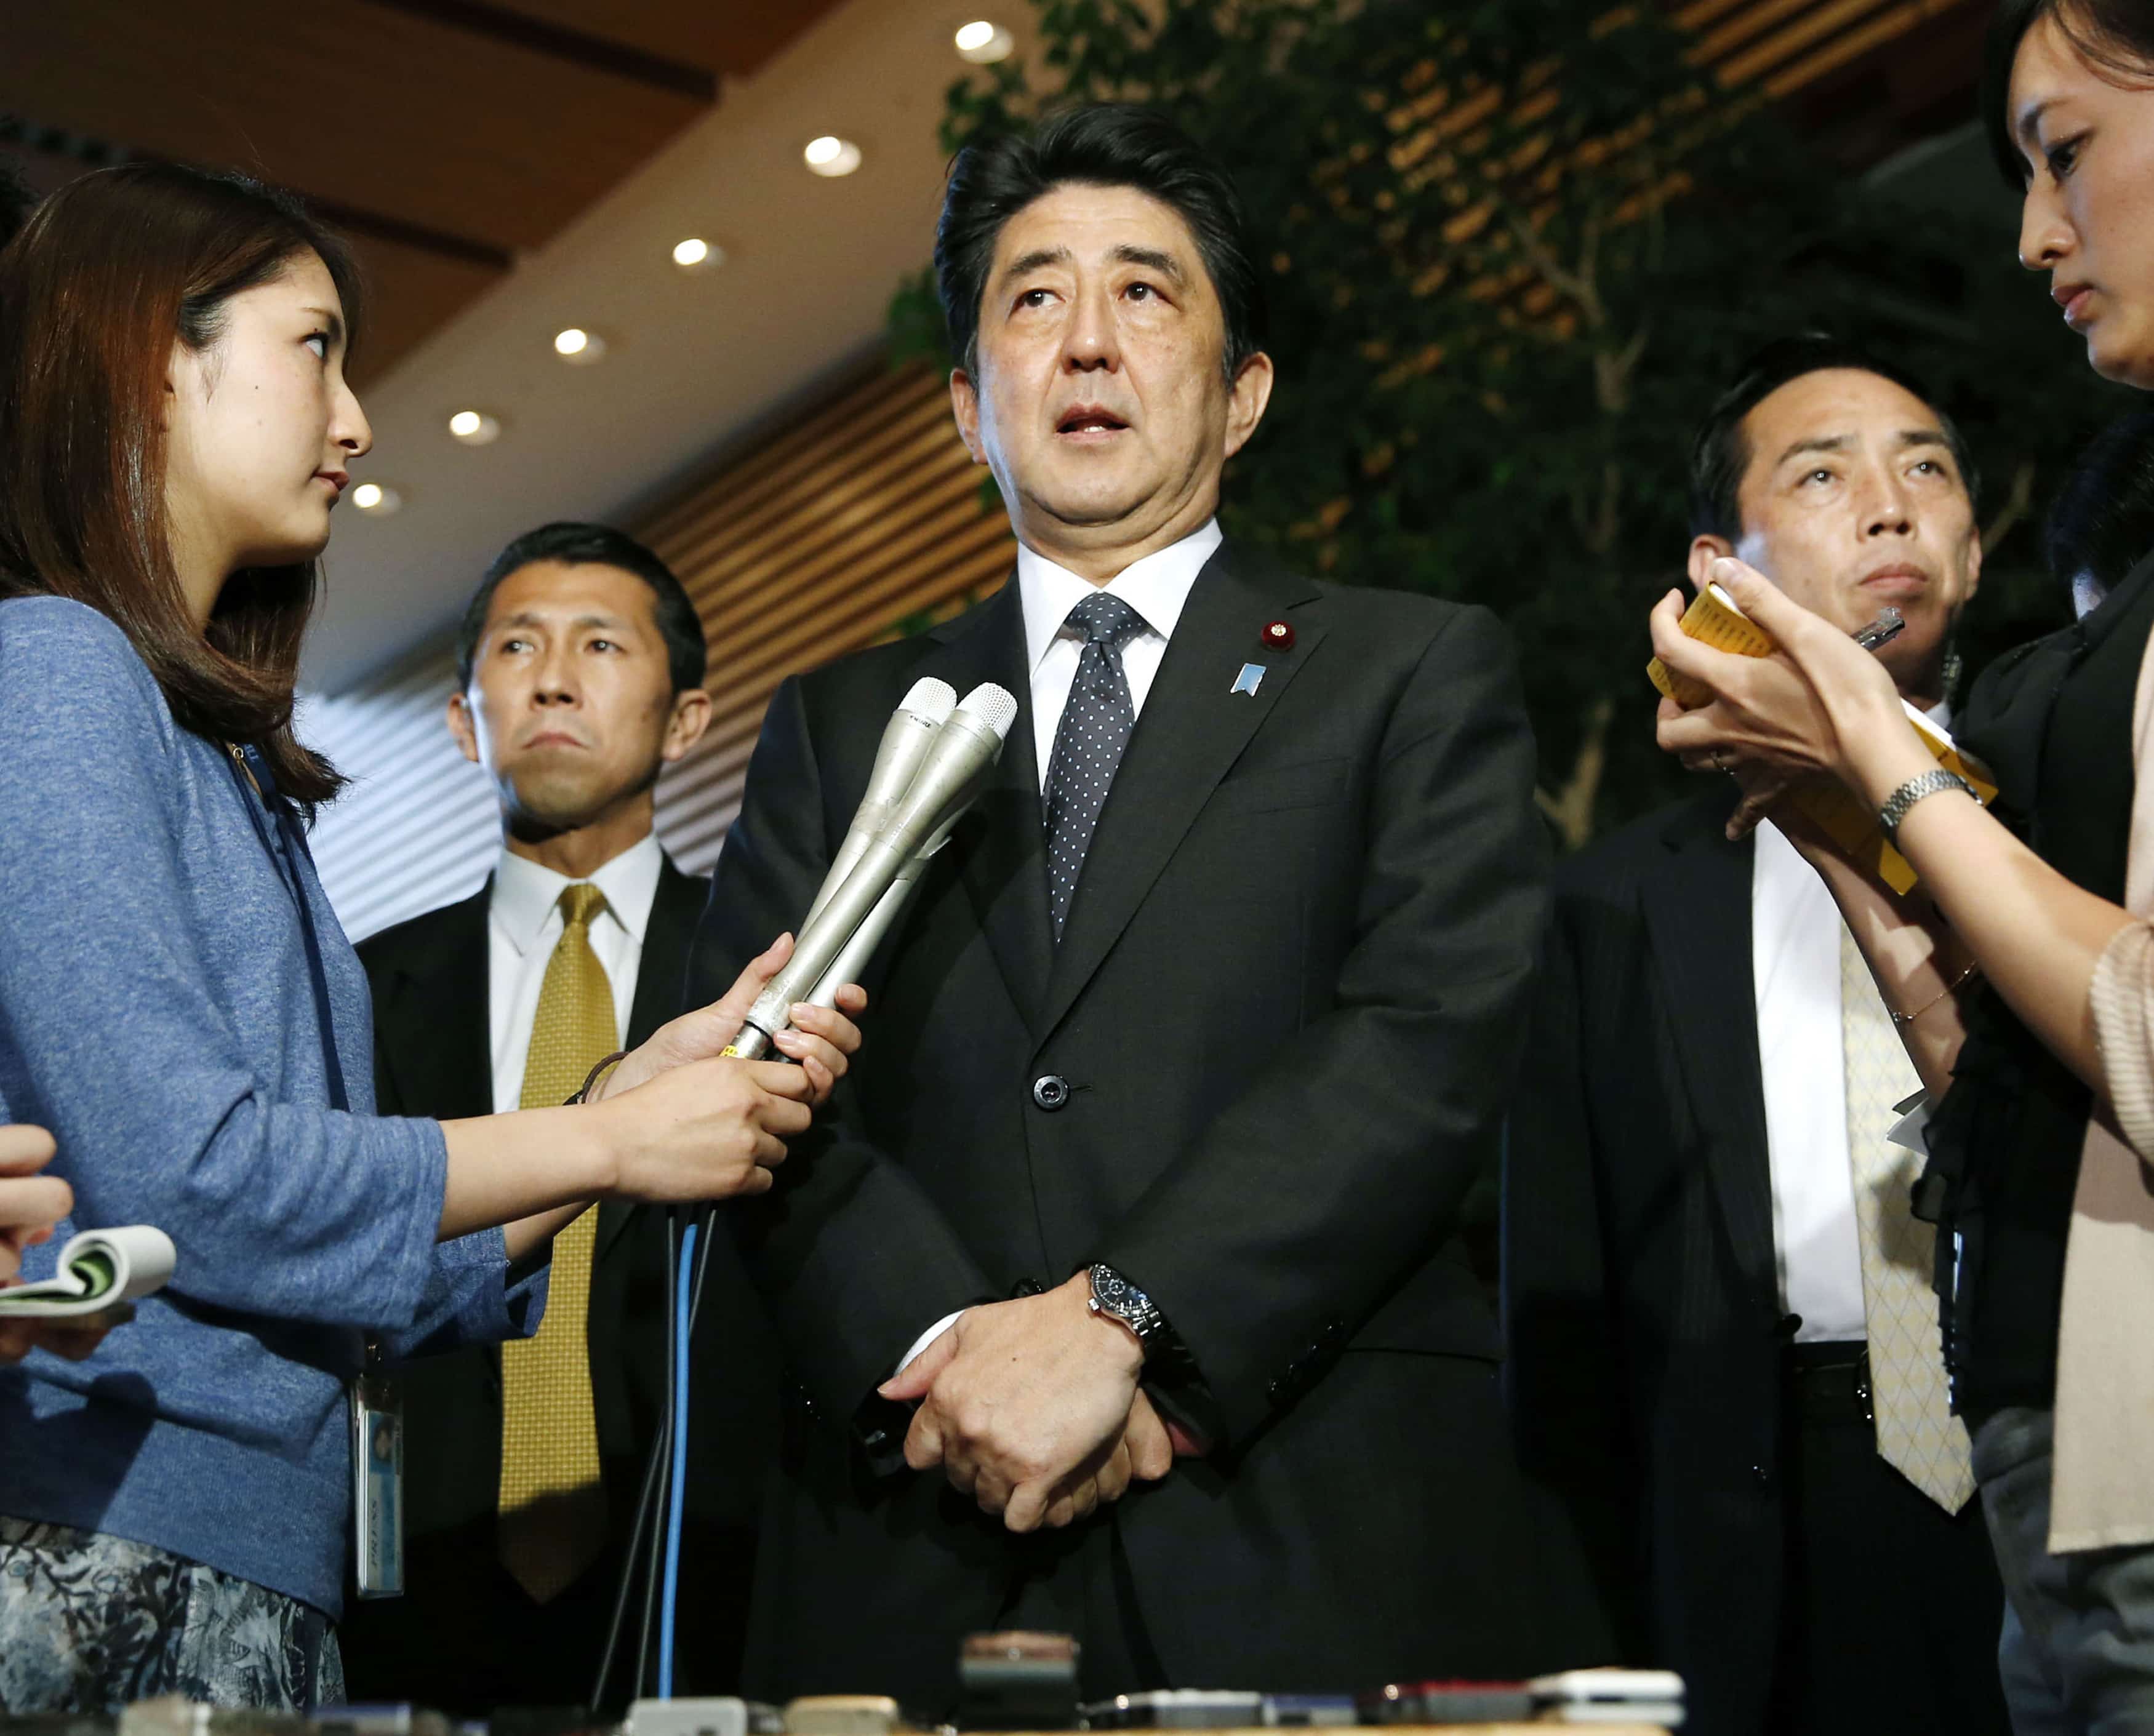 Japan's Prime Minister Shinzo Abe (C) speaks to media at his official residence in Tokyo May 29, 2014, REUTERS/Kyodo